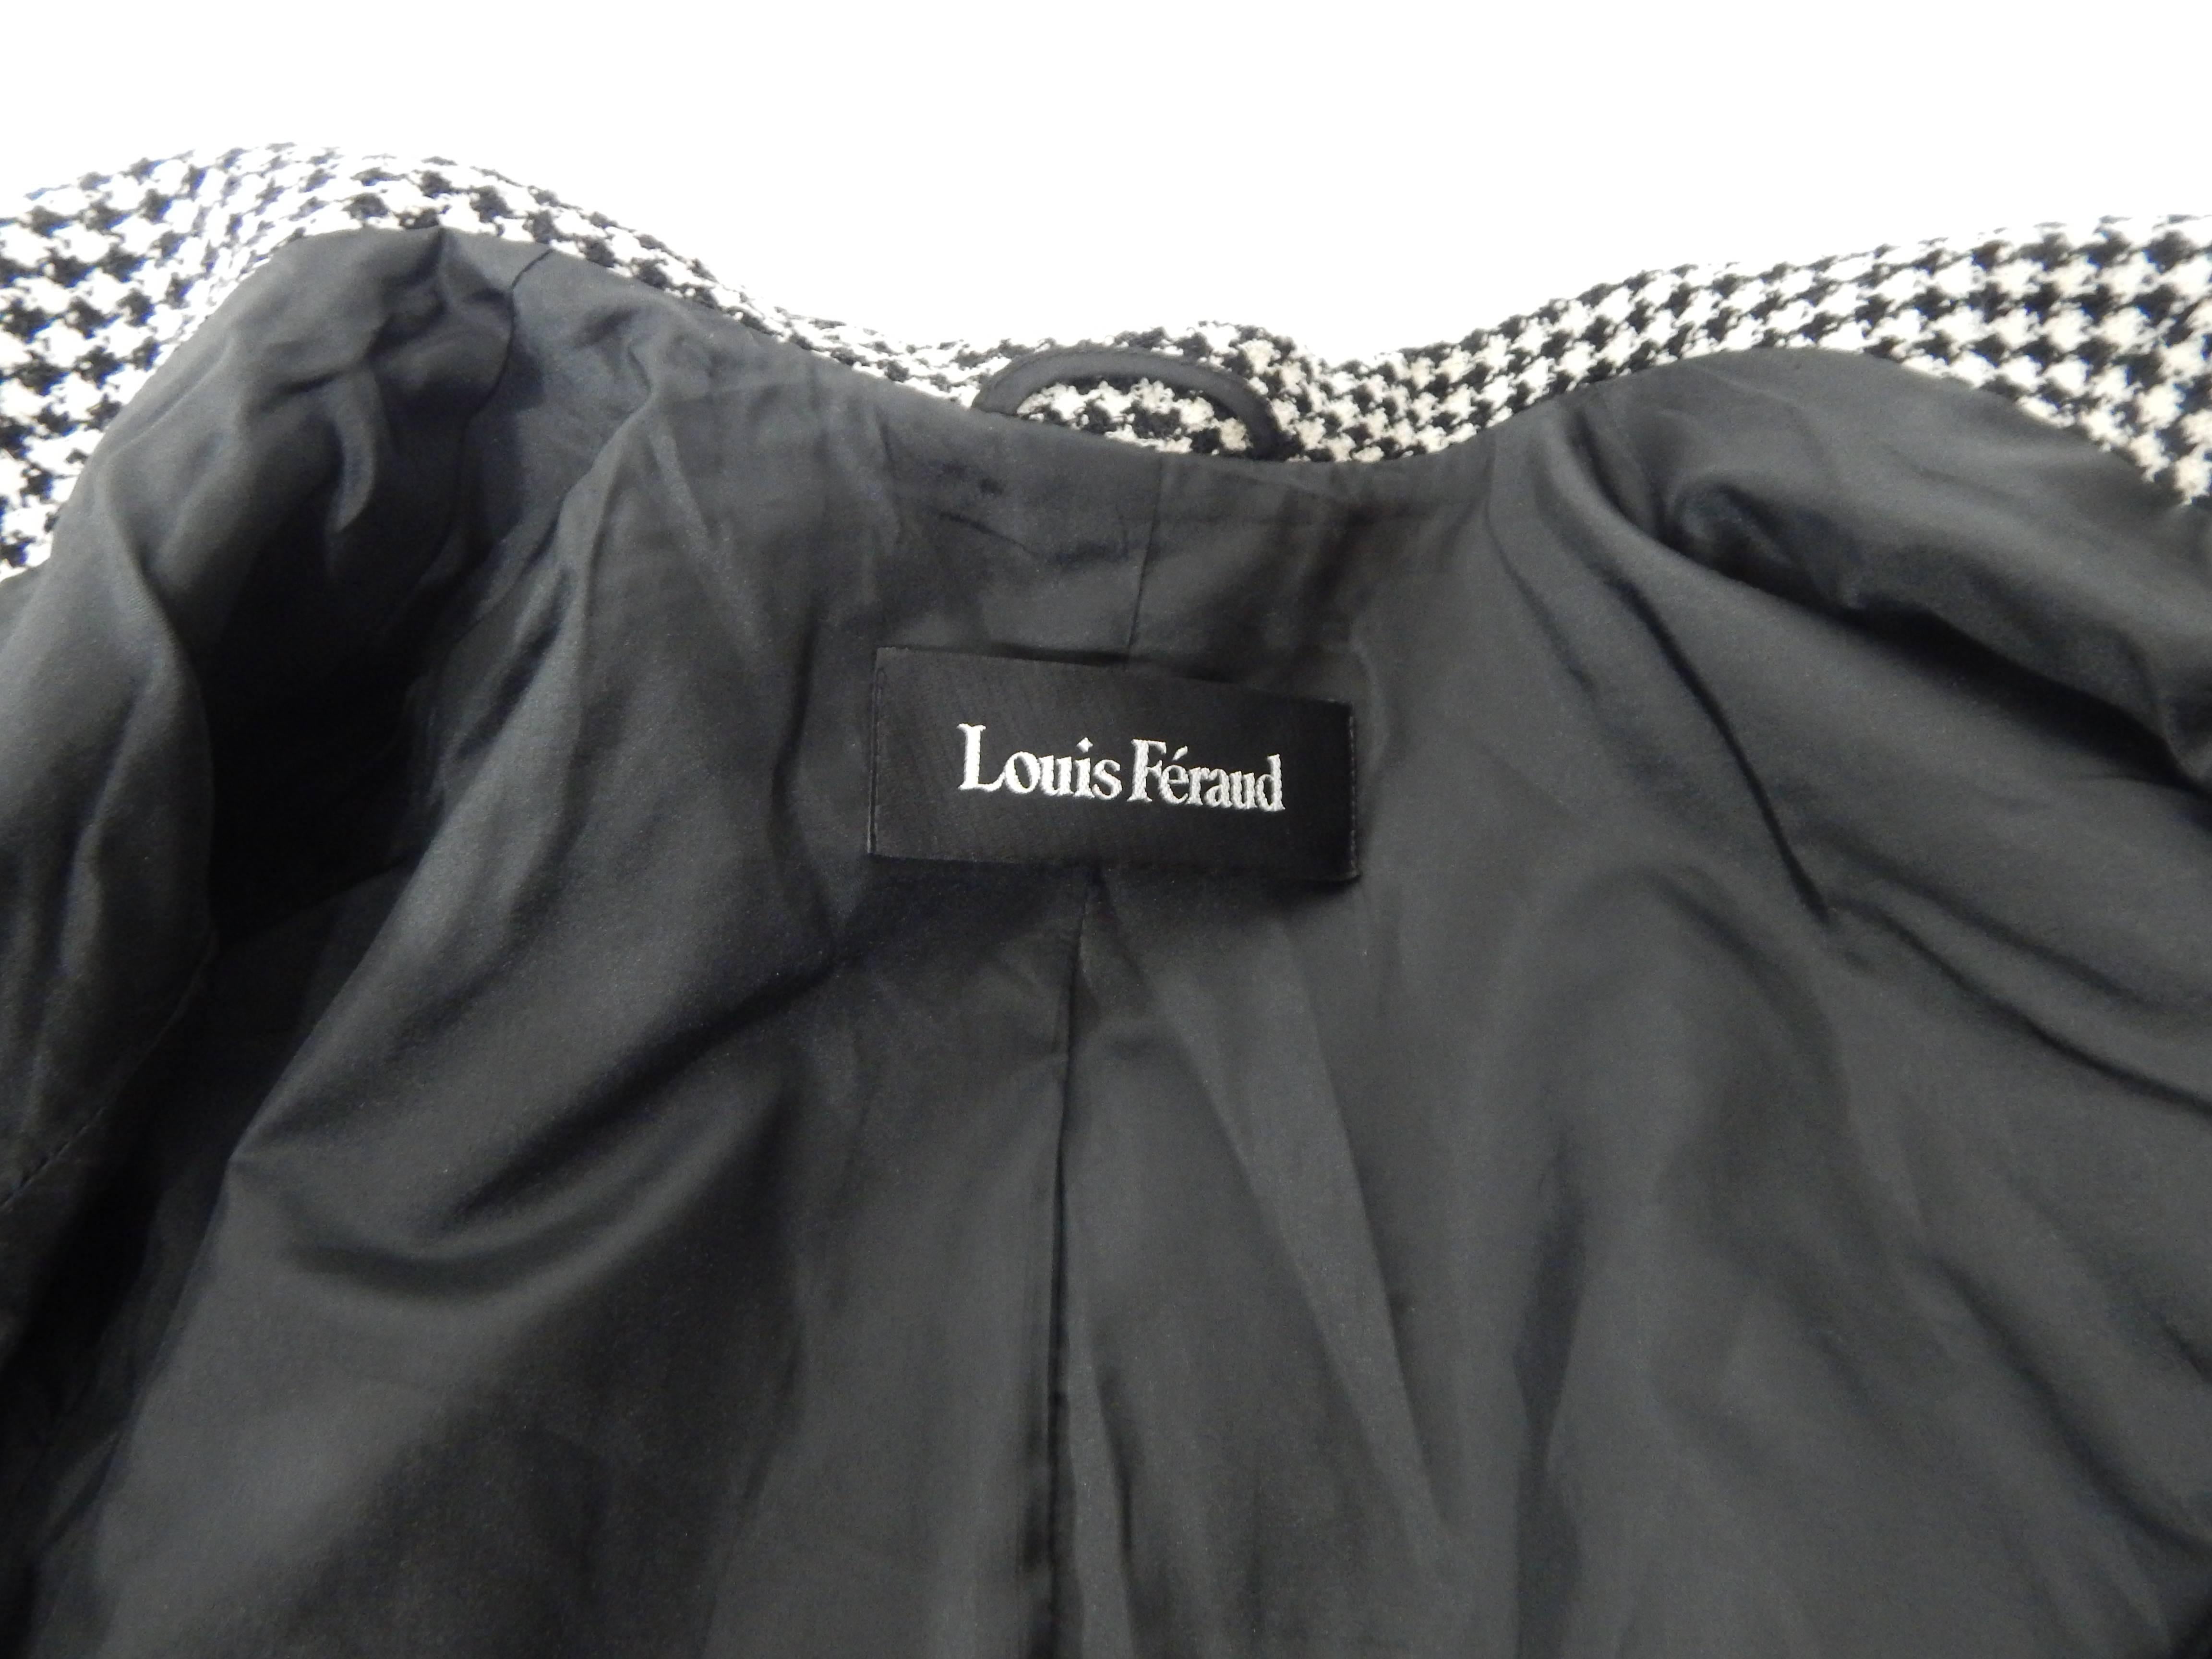 1980s Louis Feraud Jacket Blazer. Black and White Check Design. Black Silk Interior. Black Front Buttons with Louis Feraud Logo. There is not a size tag however Jacket is a large.
Excellent Condition.
Domestic priority shipping is complimentary for